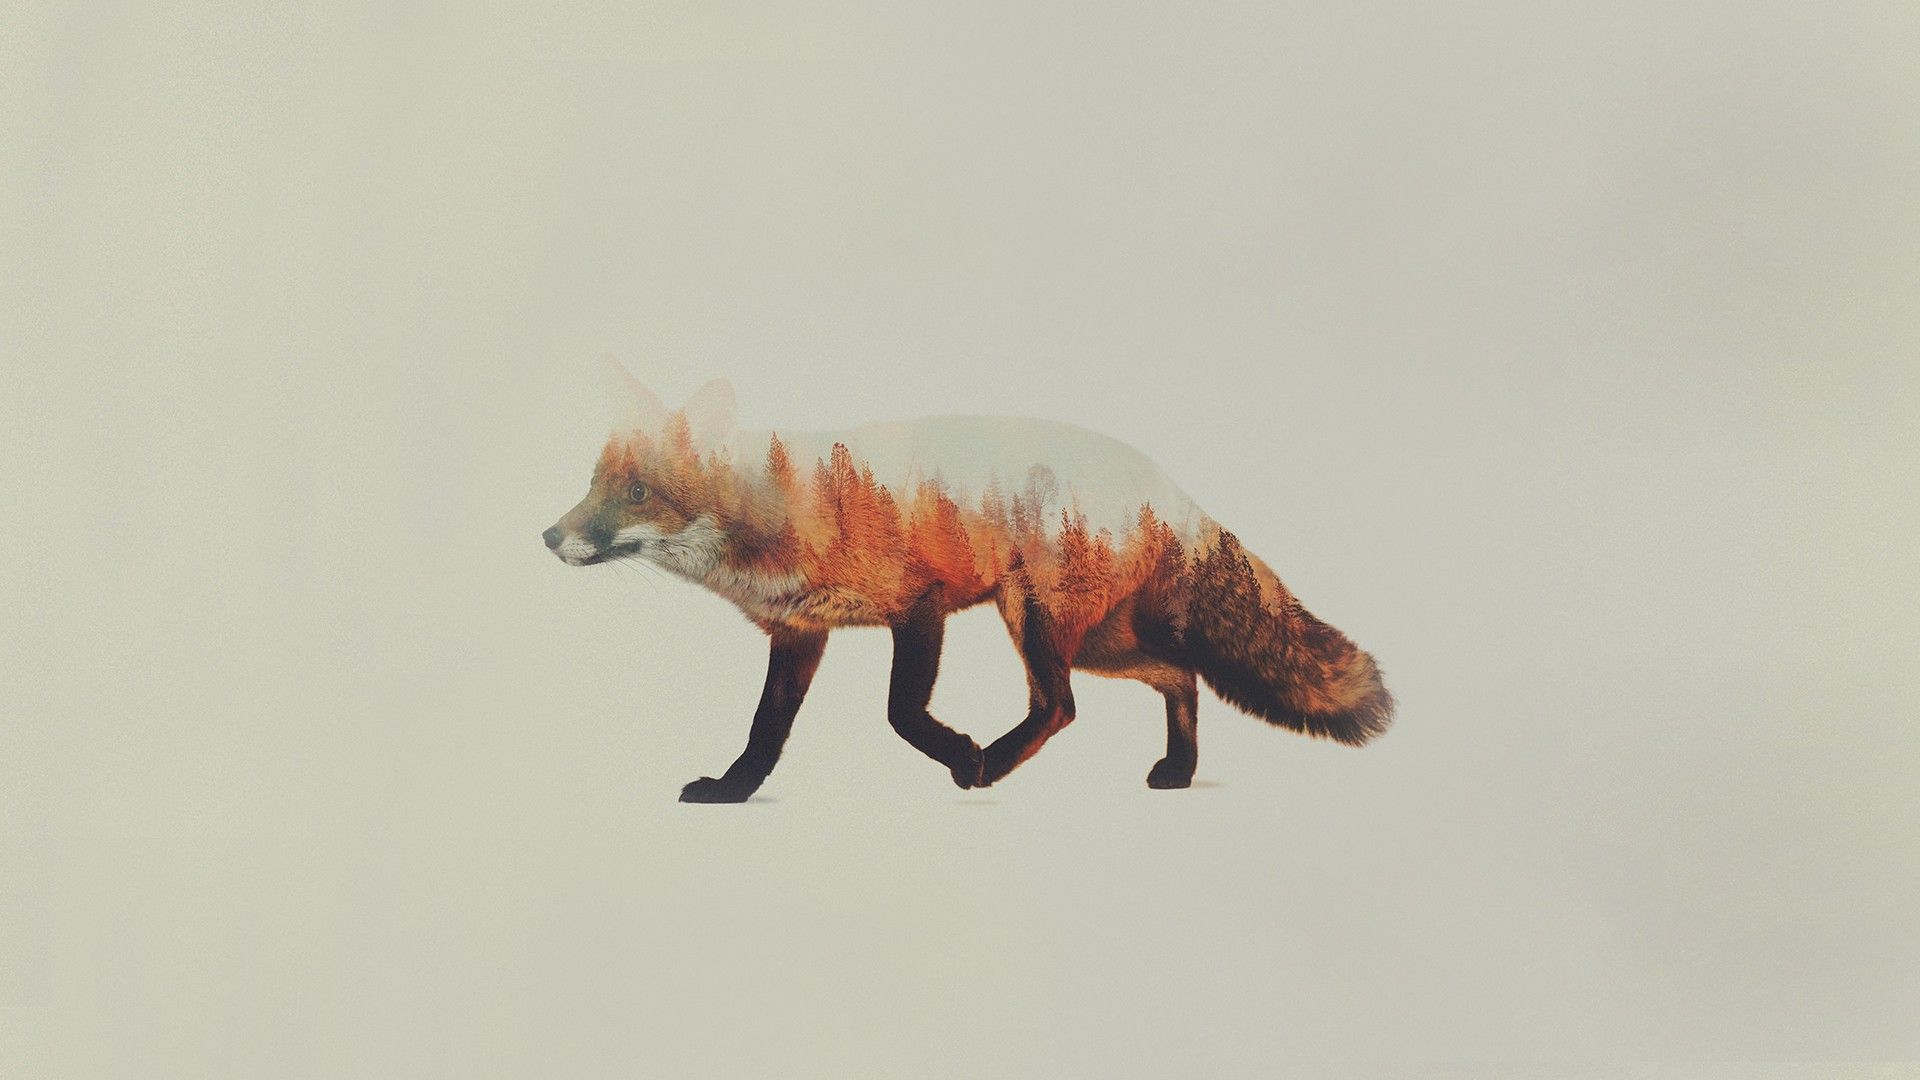 #animals, #Andreas Lie, #fox, #simple background, #double